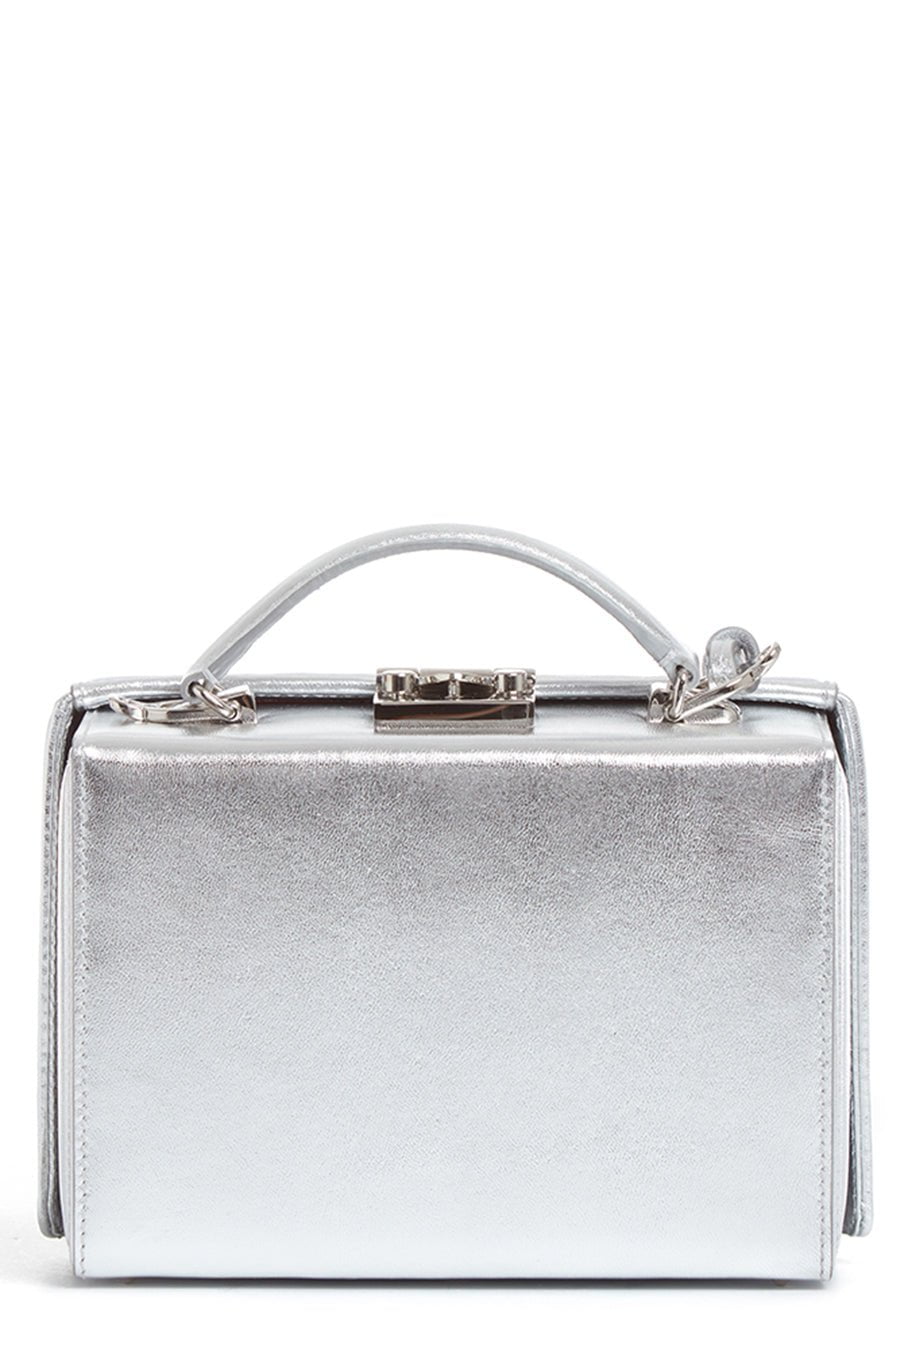 MARK CROSS-Grace Small Box Bag - Quilted Silver-SILVER